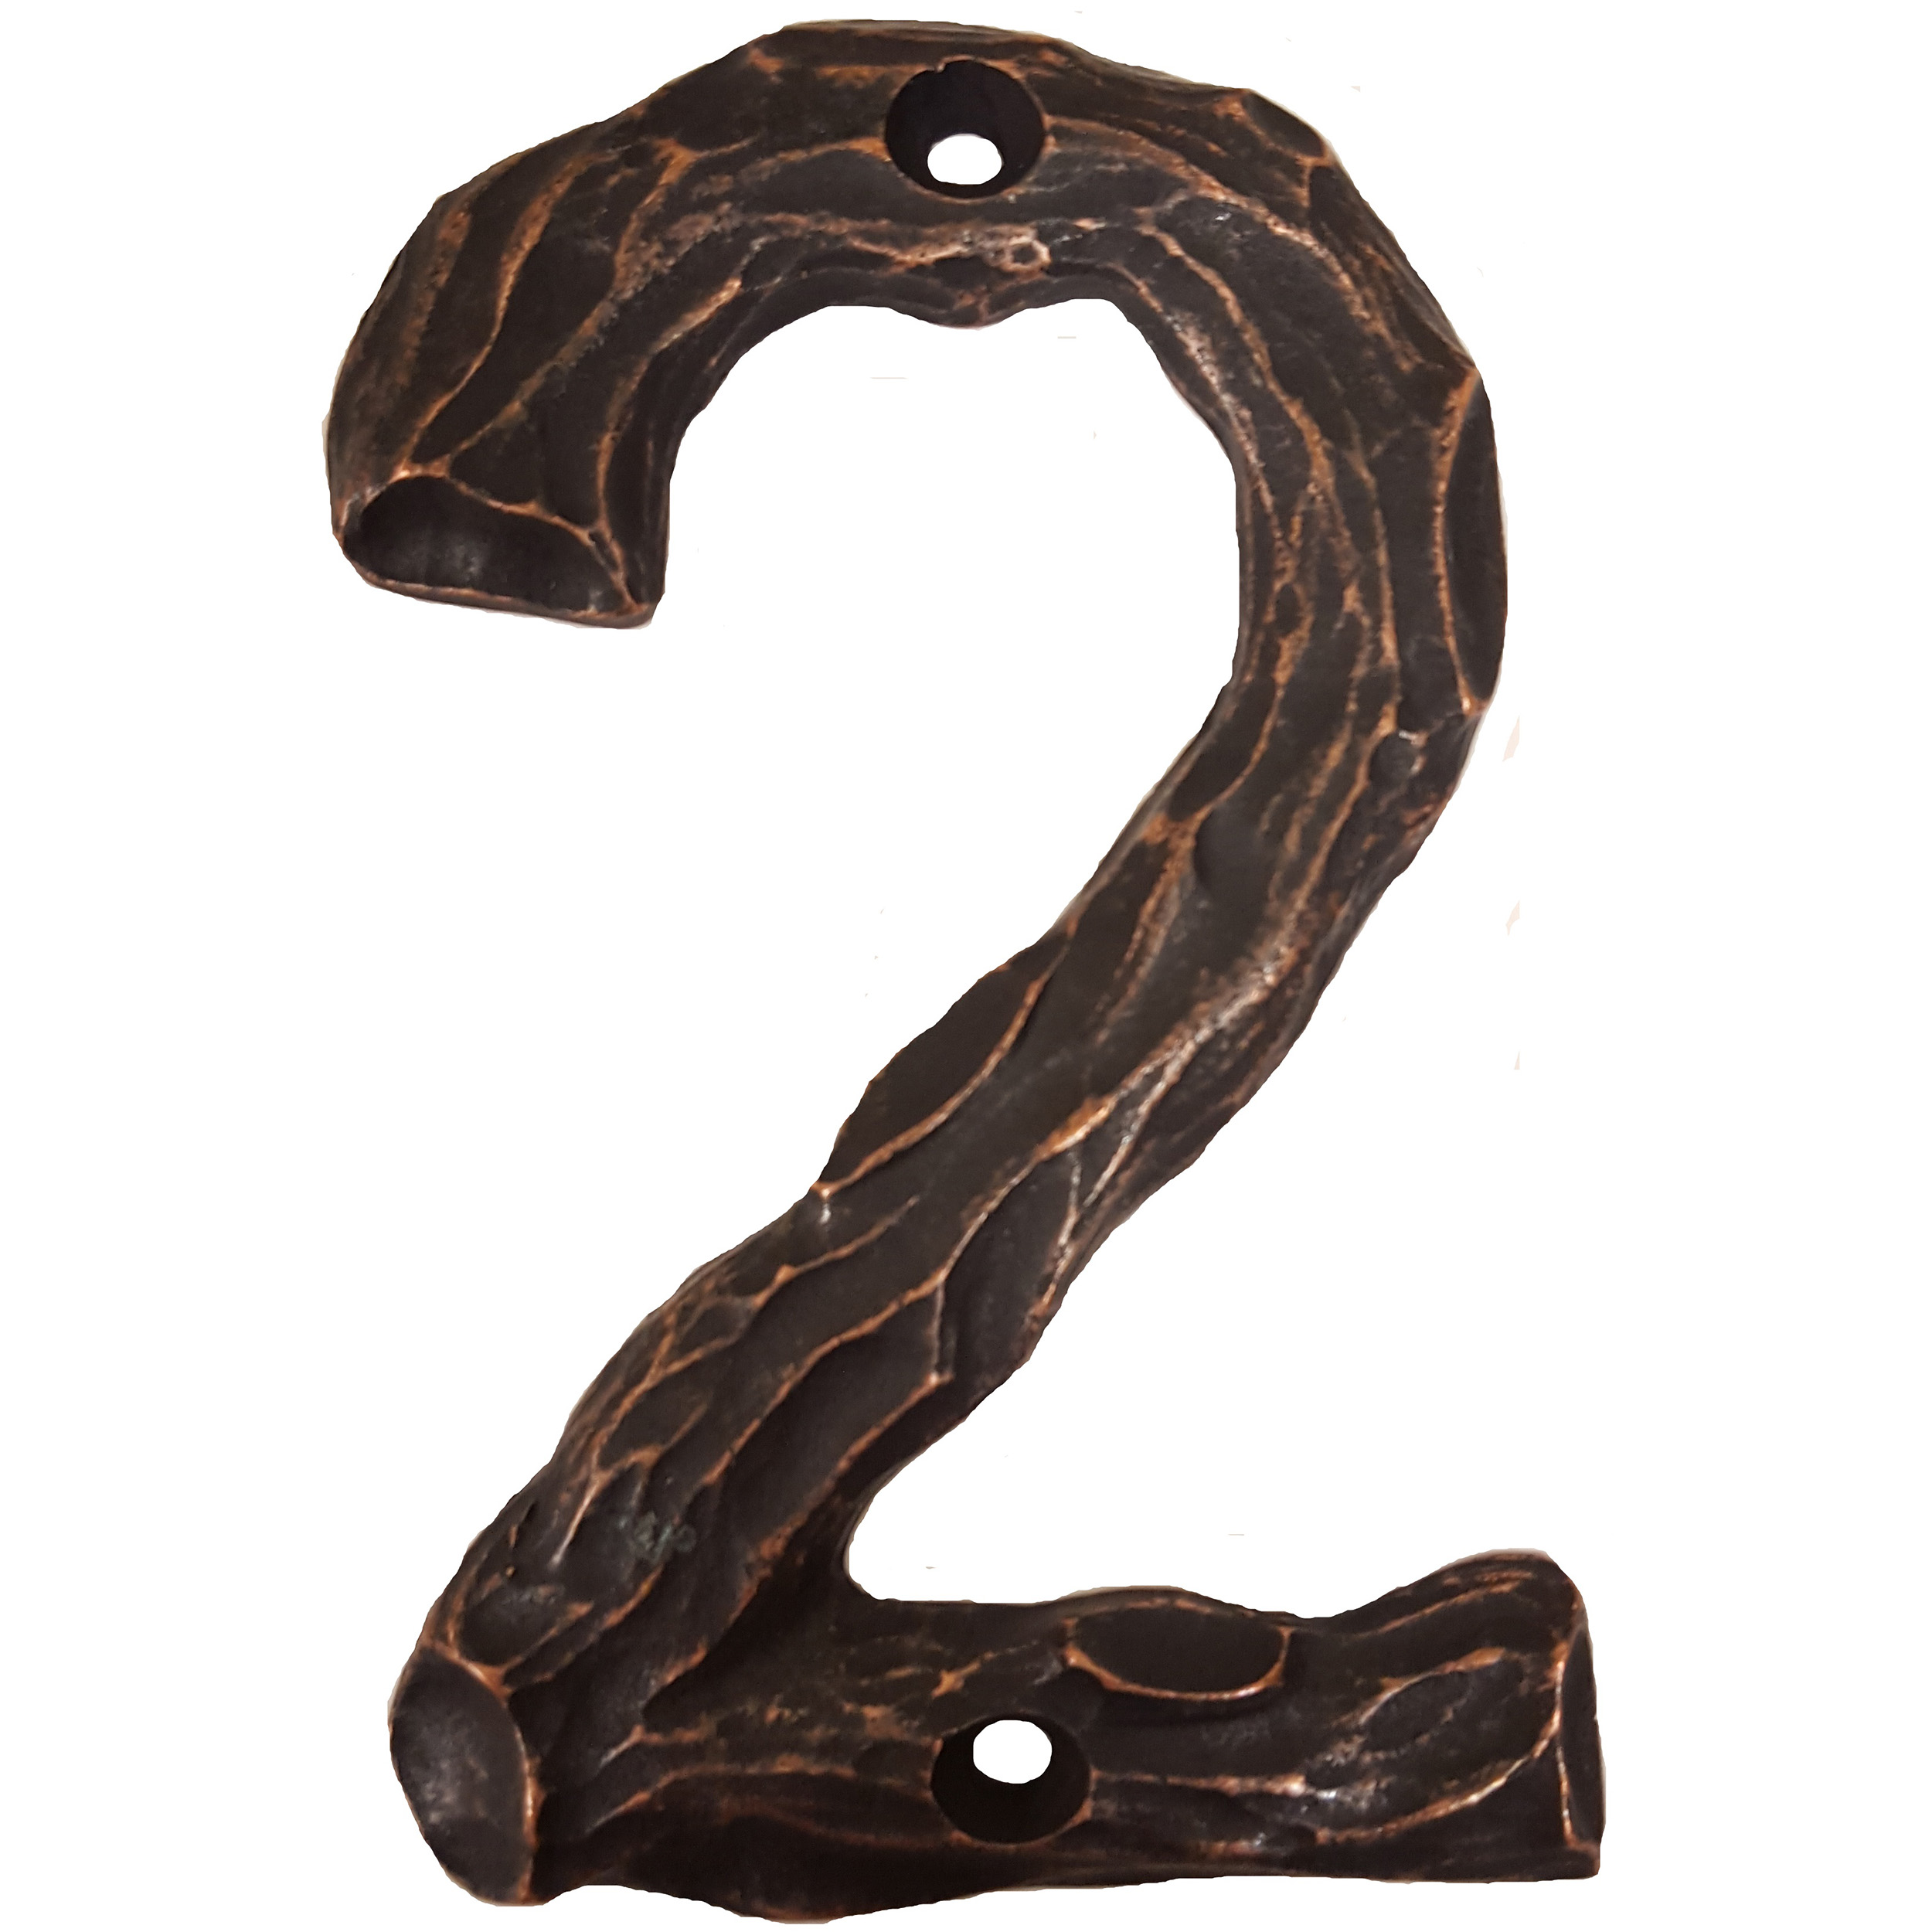 Lhn2-orb Log House Number 2, Oil Rubbed Bronze, 1 Piece